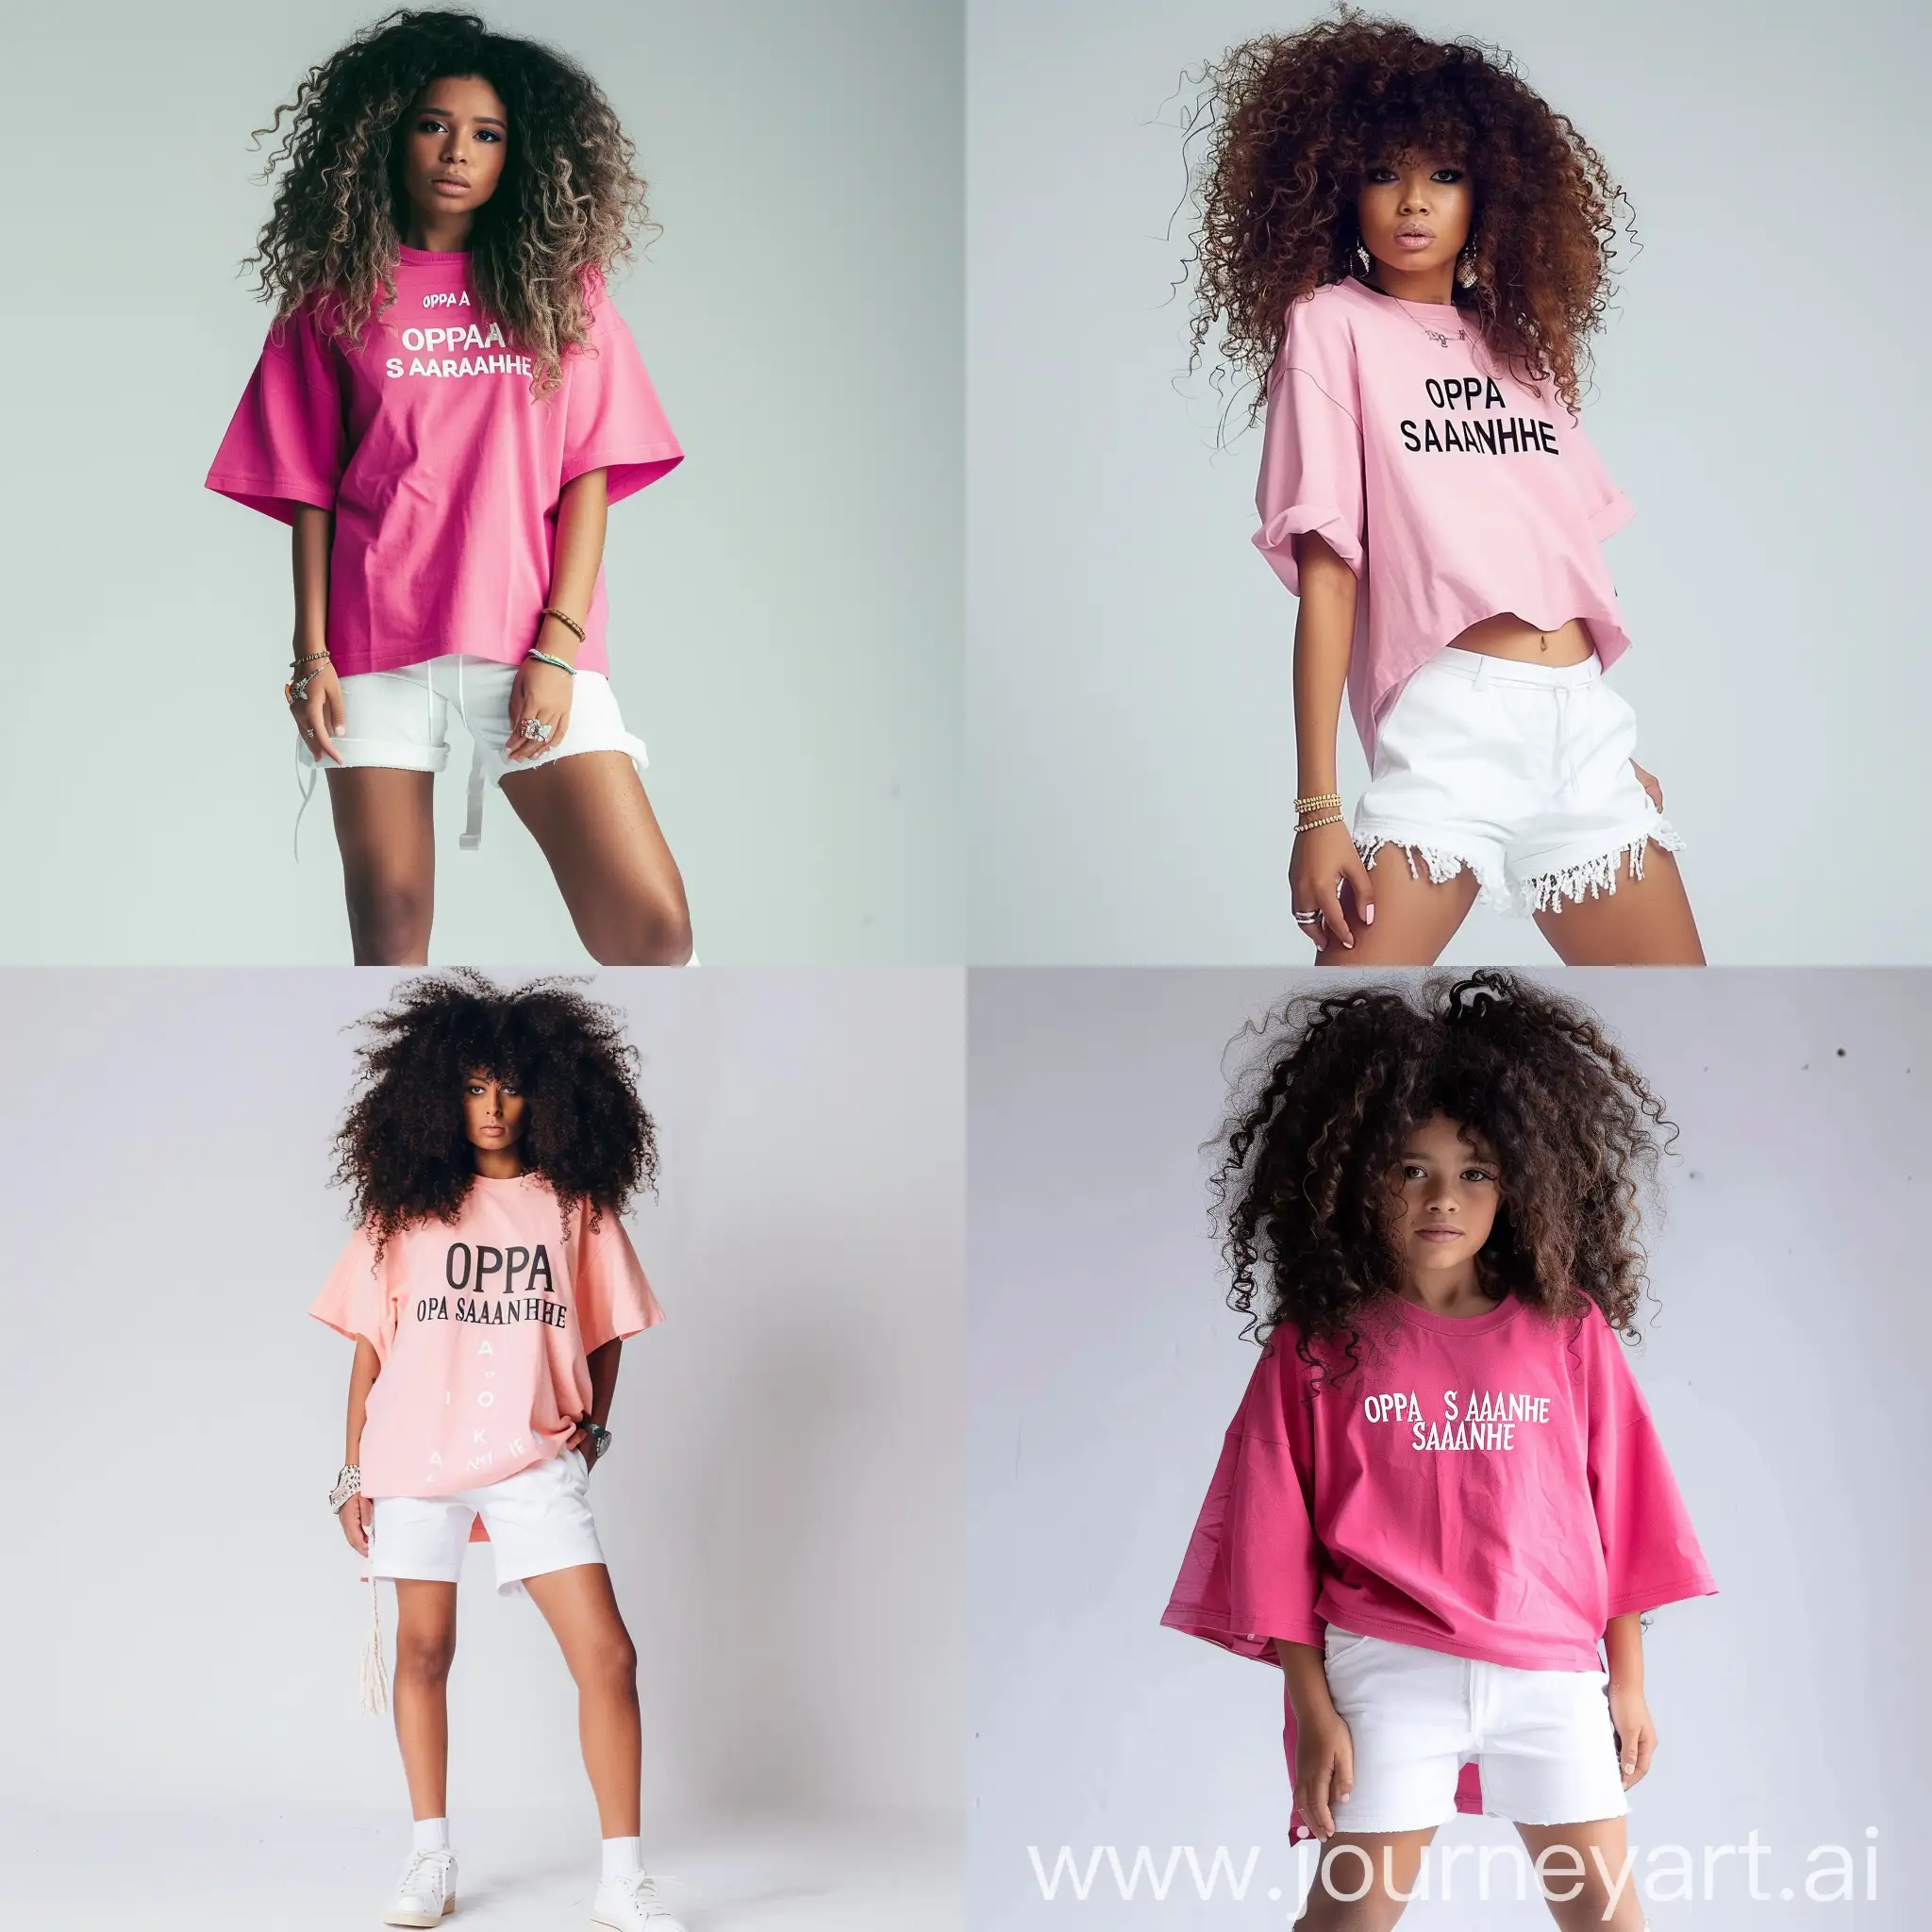 Create a realistic photo of a girl with curly hair, wearing white shorts and an oversized pink t-shirt with the words "OPPA SARANHE" on the chest